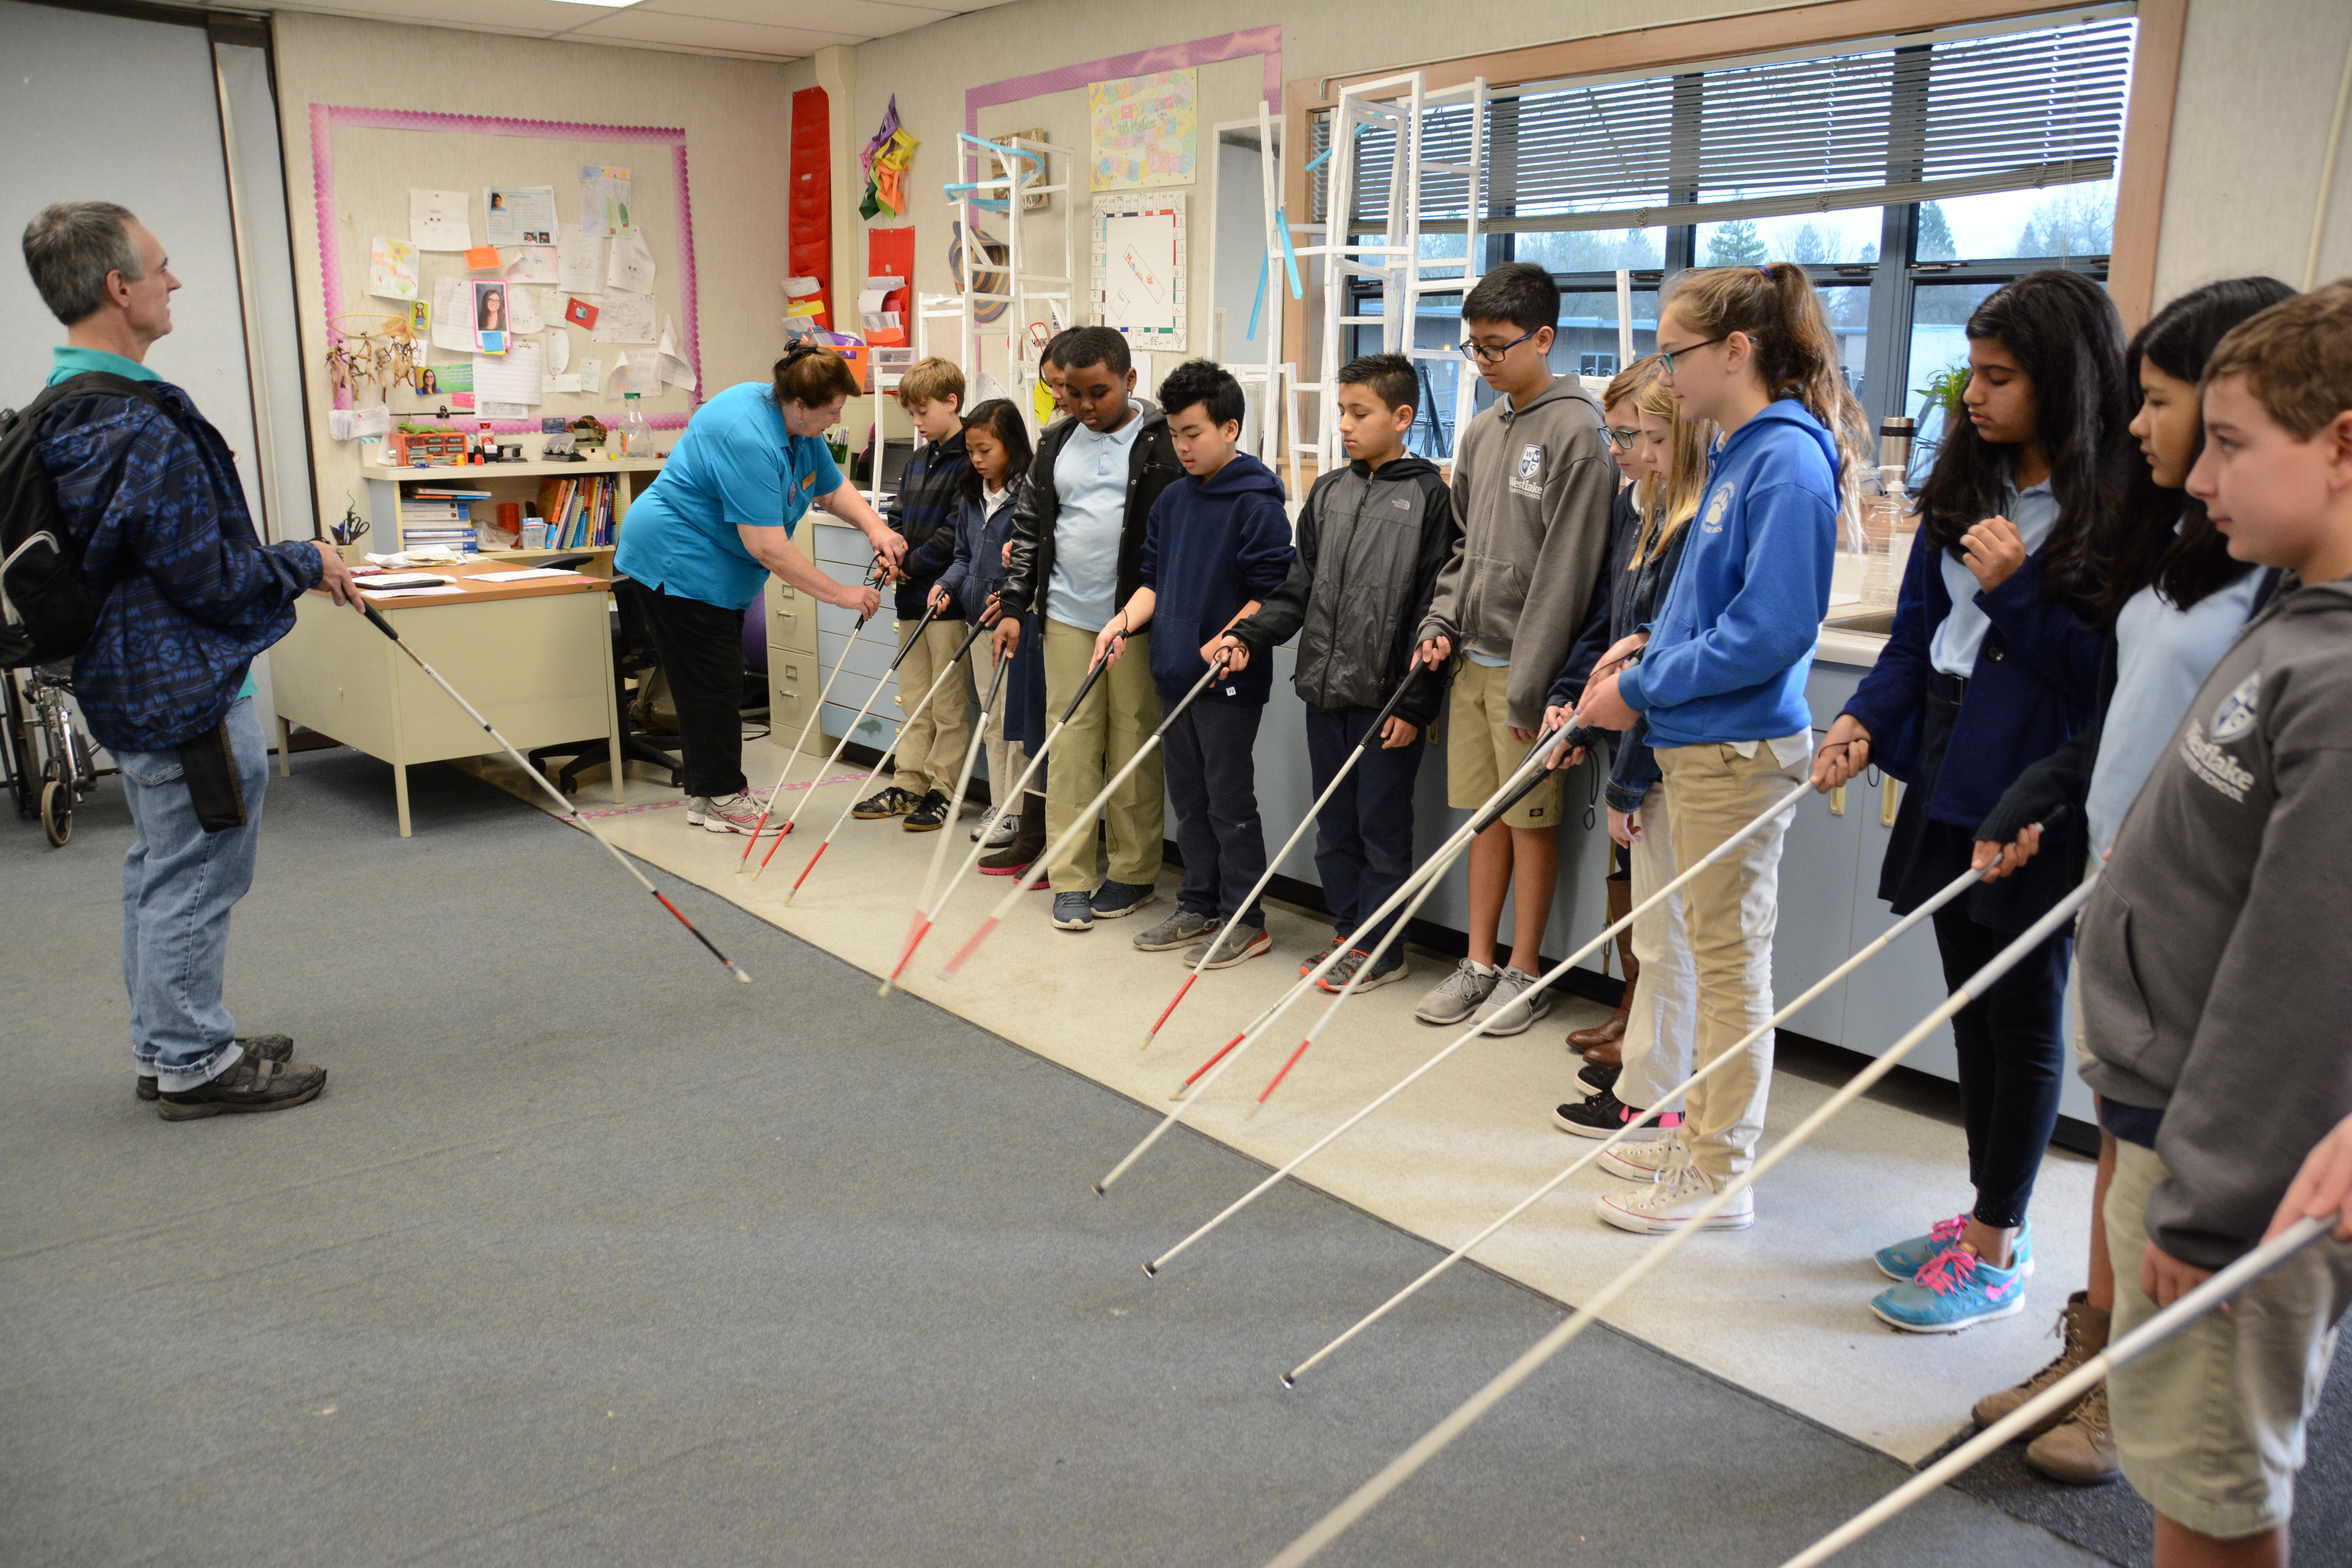 Our 6th graders participated in “A Touch of Understanding,”a disability awareness program designed to educate students to understand the challenges associated with disabilities and to accept and respect all individuals.